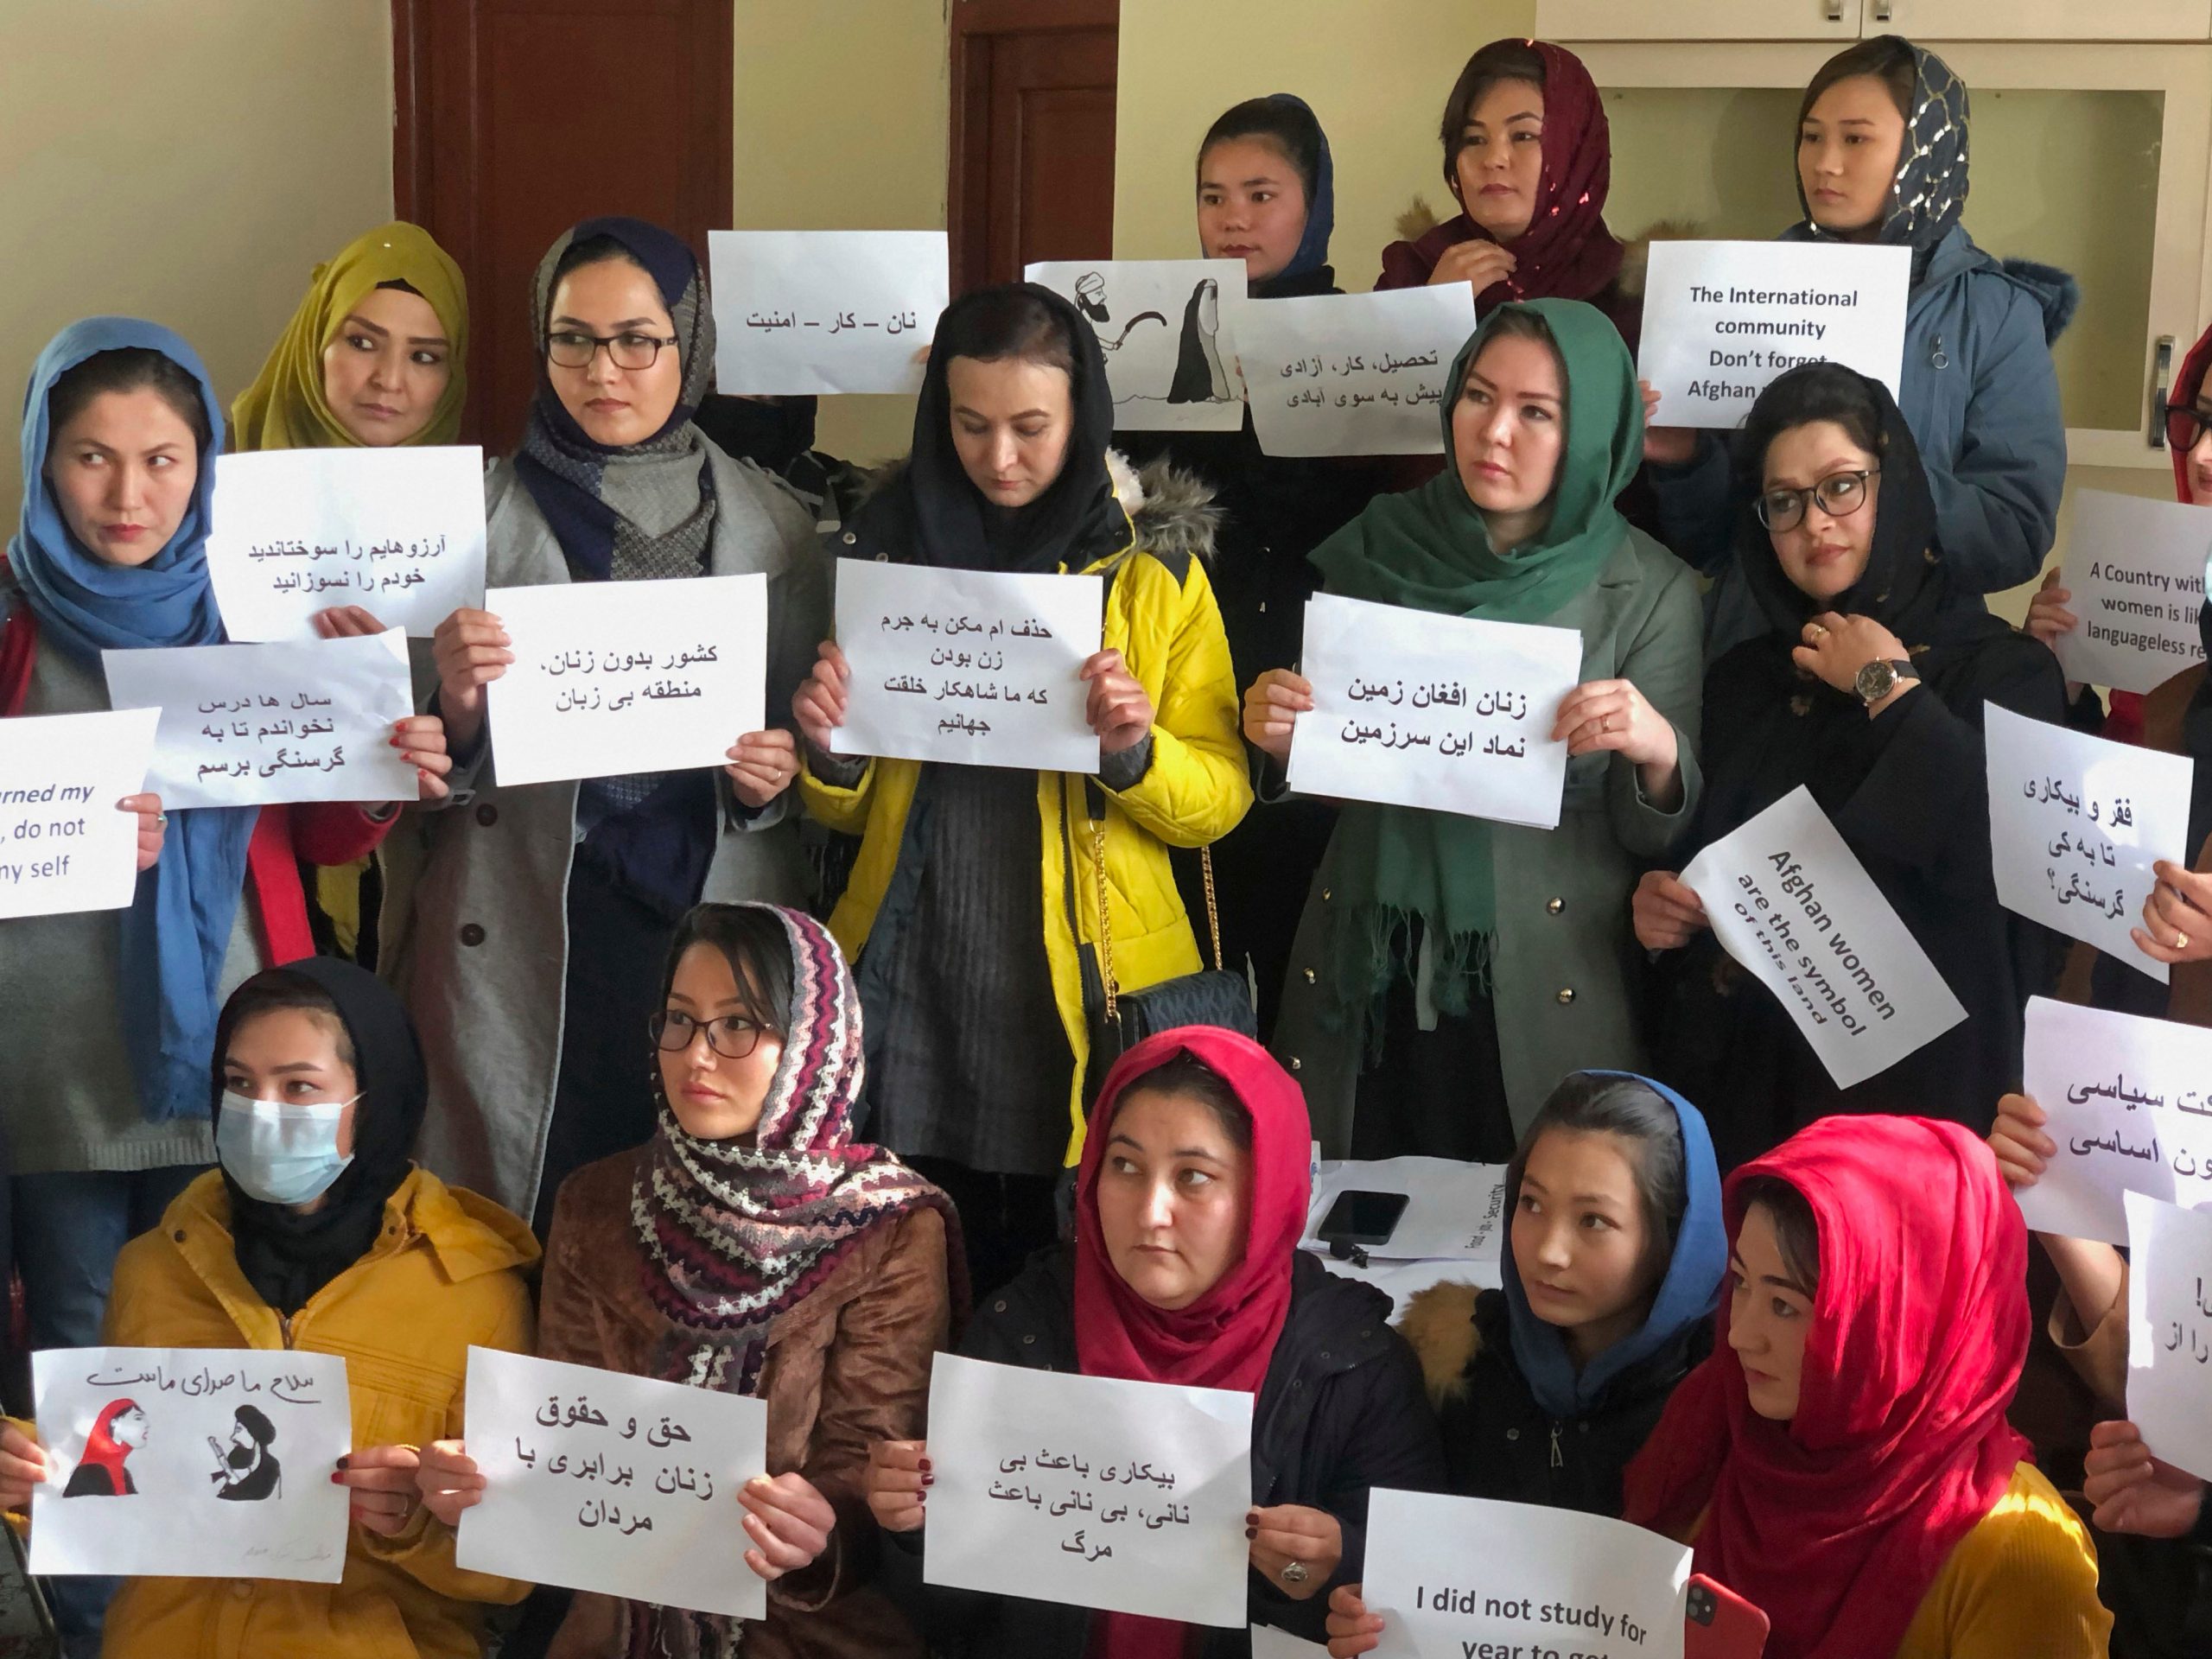 Taliban arrests another woman’s rights activist in Afghanistan